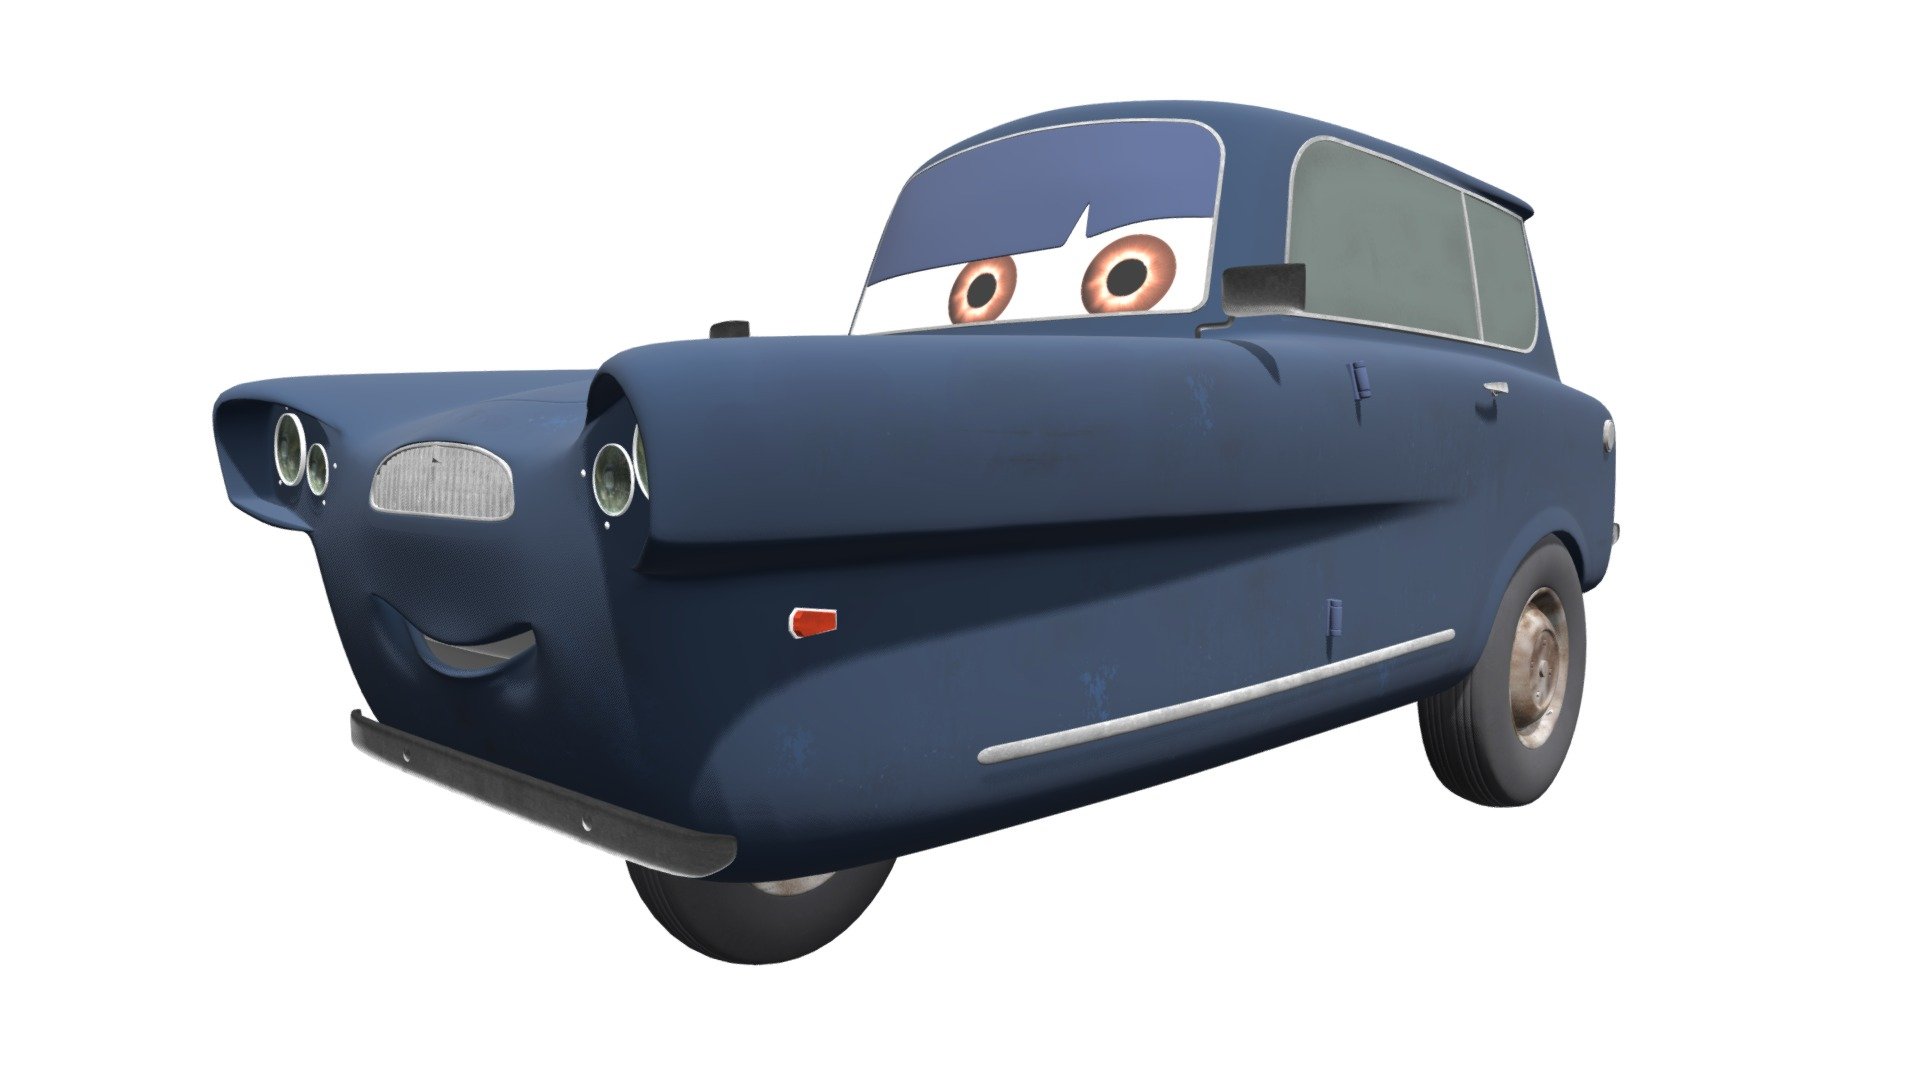 Quality 3d model of Tomber, one of the characters of Cars 2 film.

Included Formats:

3DS

Lightwave

3ds Max

Maya

OBJ

Softimage - Cars 2 Movie - Tomber - Buy Royalty Free 3D model by 3DHorse 3d model